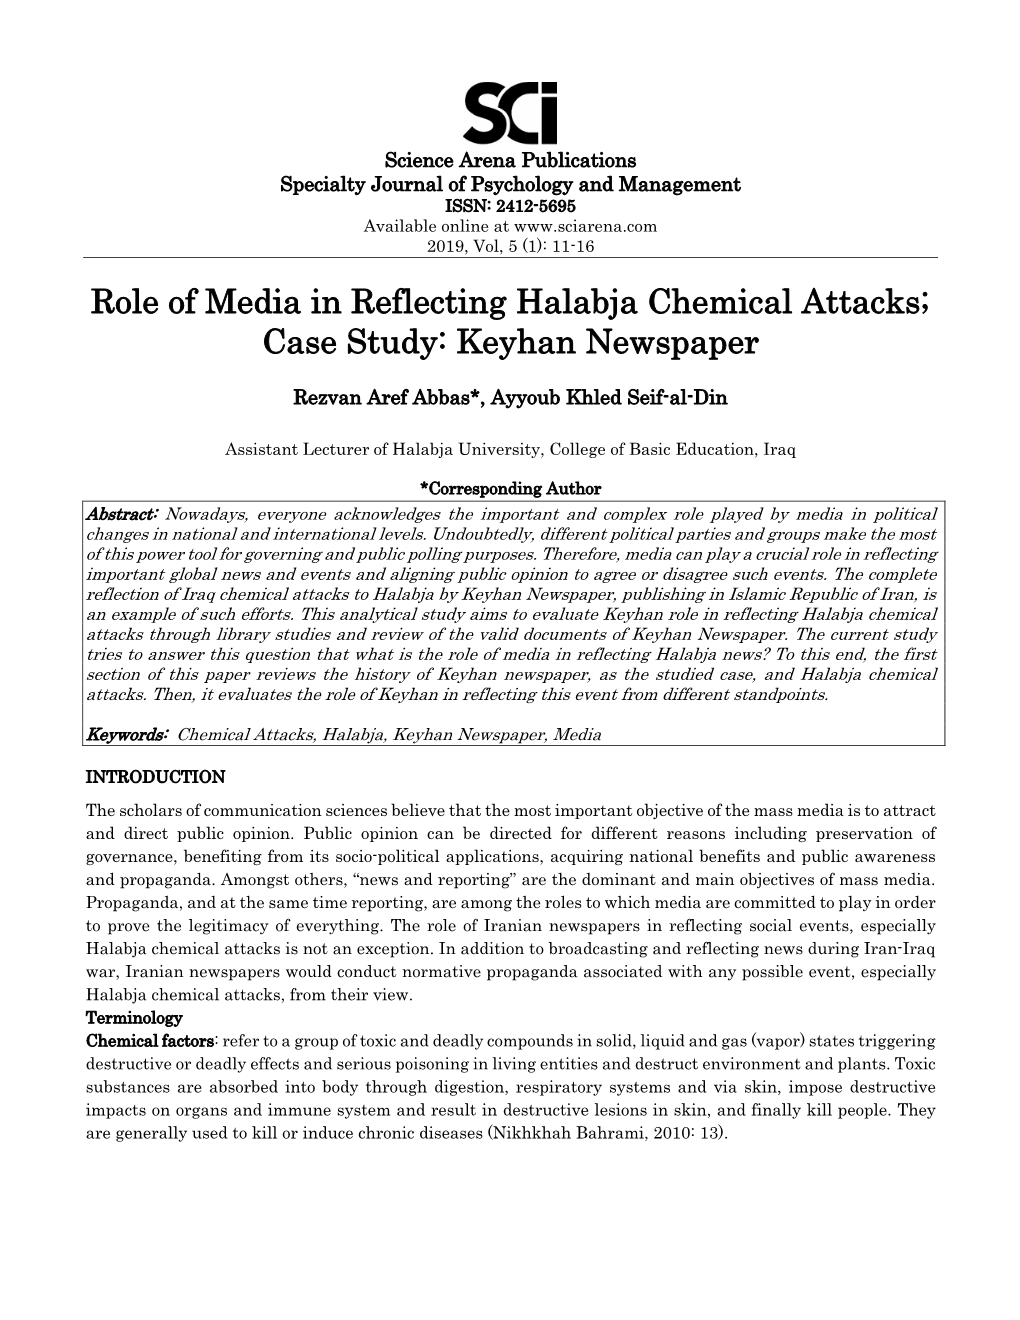 Role of Media in Reflecting Halabja Chemical Attacks; Case Study: Keyhan Newspaper